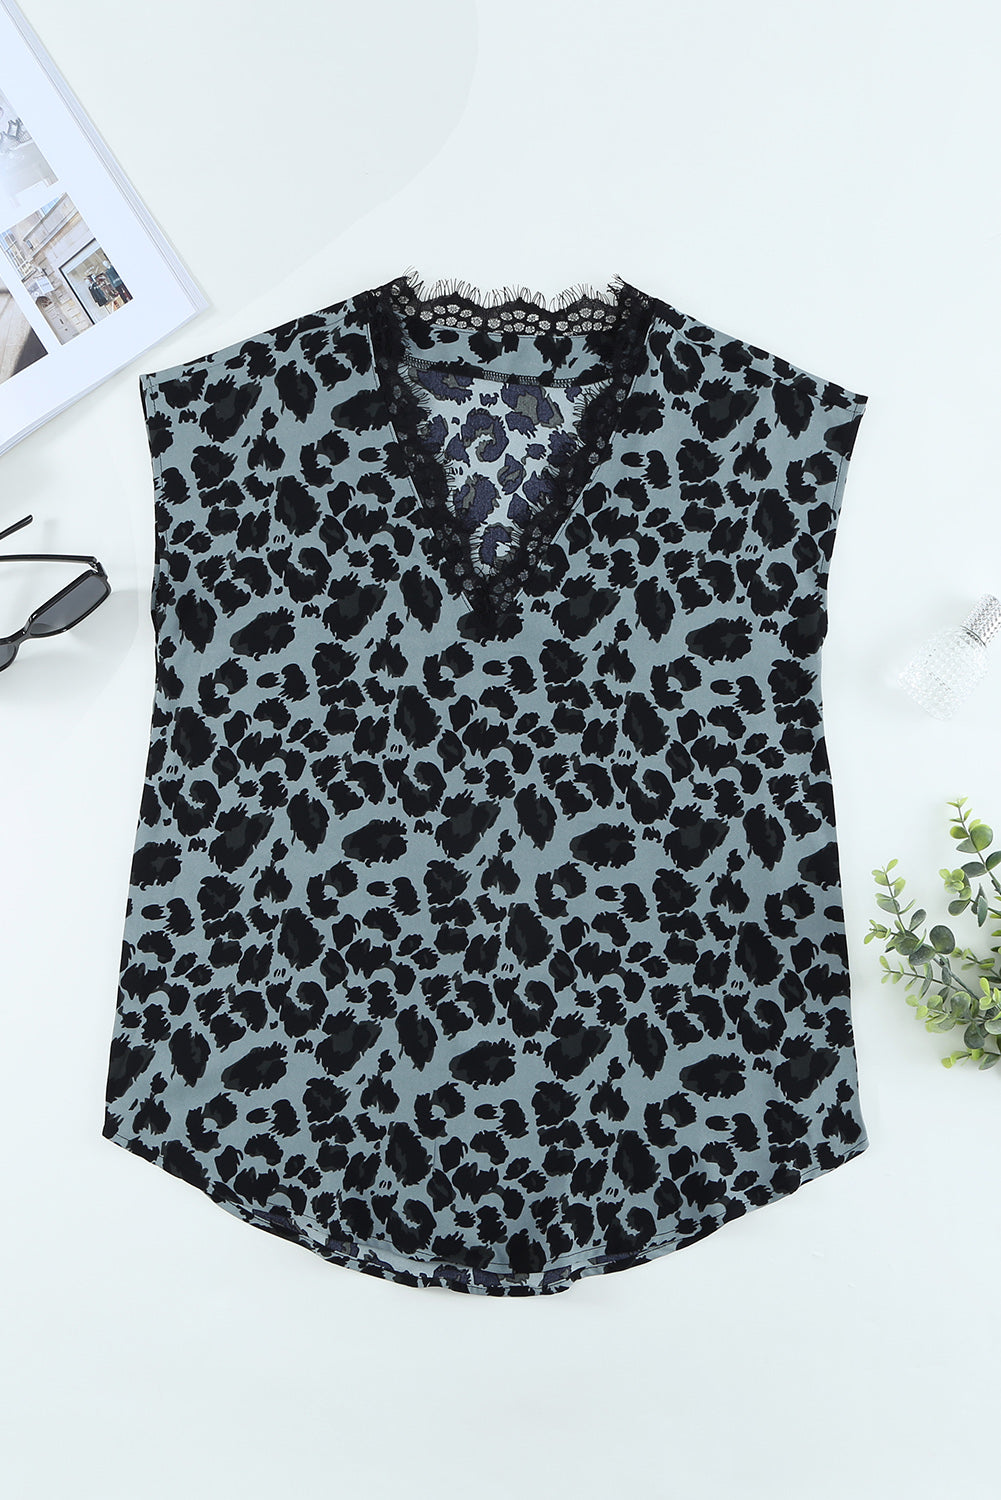 White/Apricot Floral Scalloped V Neck Short Sleeves Top Black Polka Dot Scalloped V Neck Short Sleeves Top Green Leopard Scalloped V Neck Short Sleeves Top